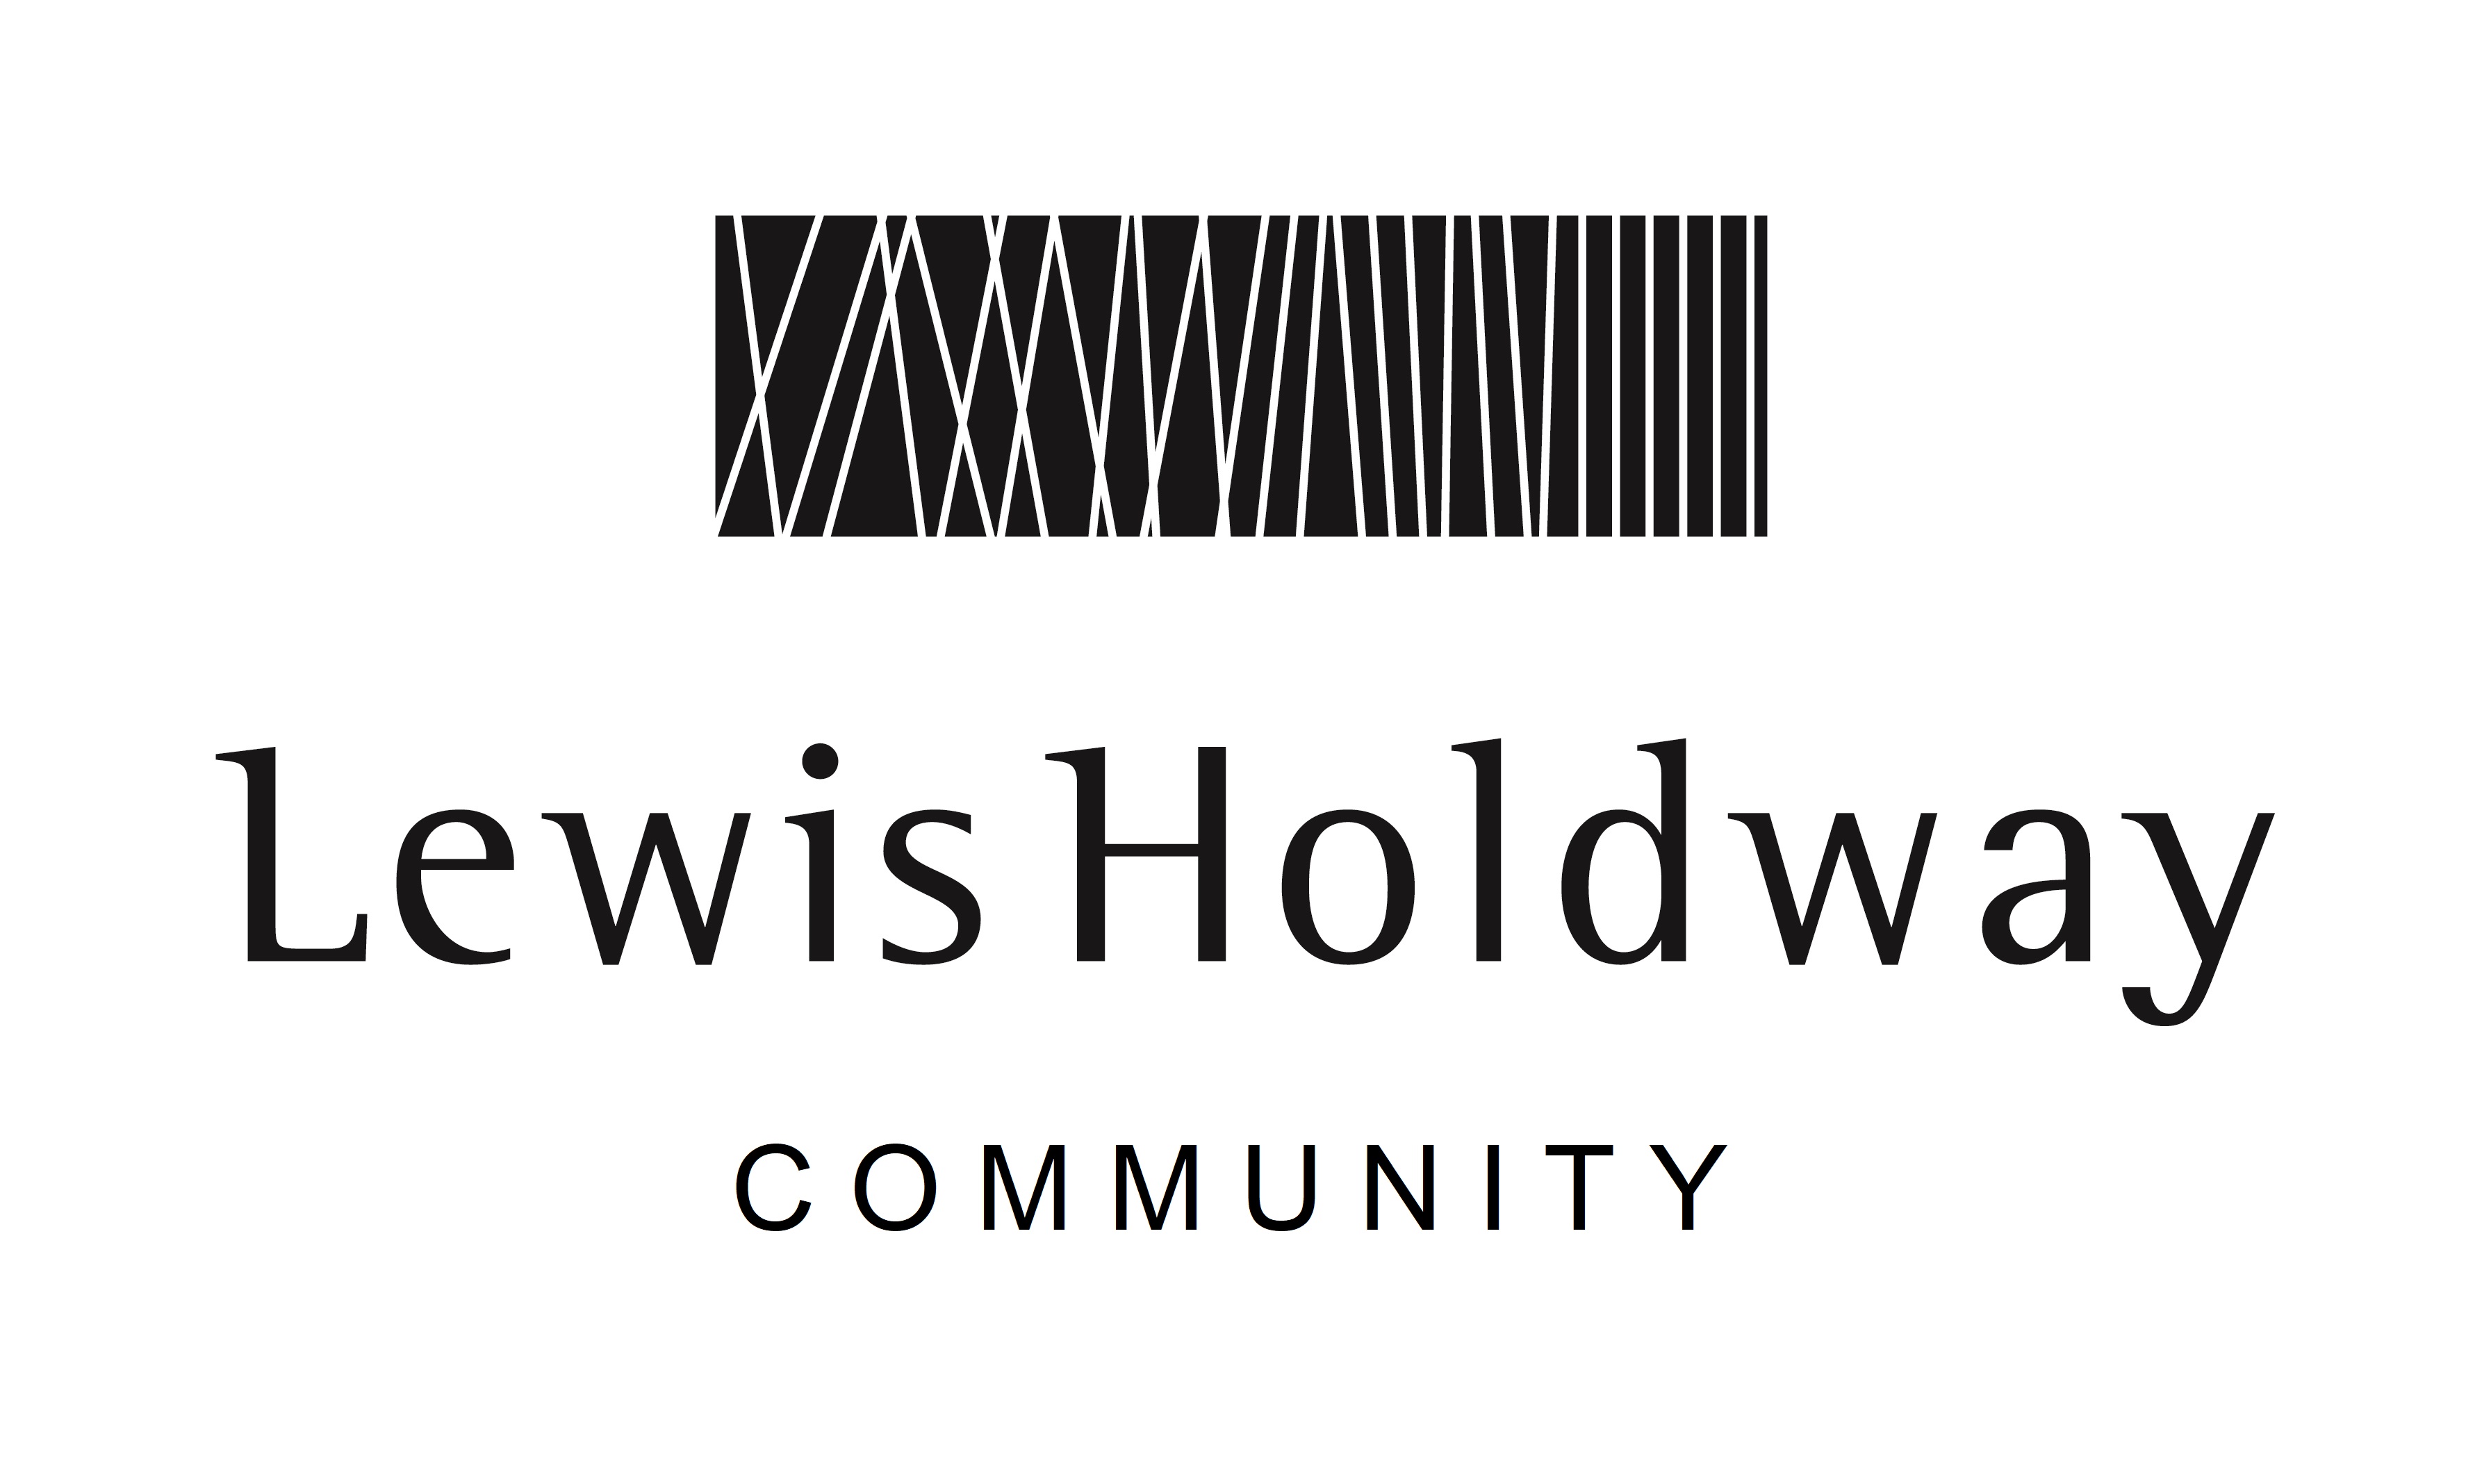 Lewis Holdway Community